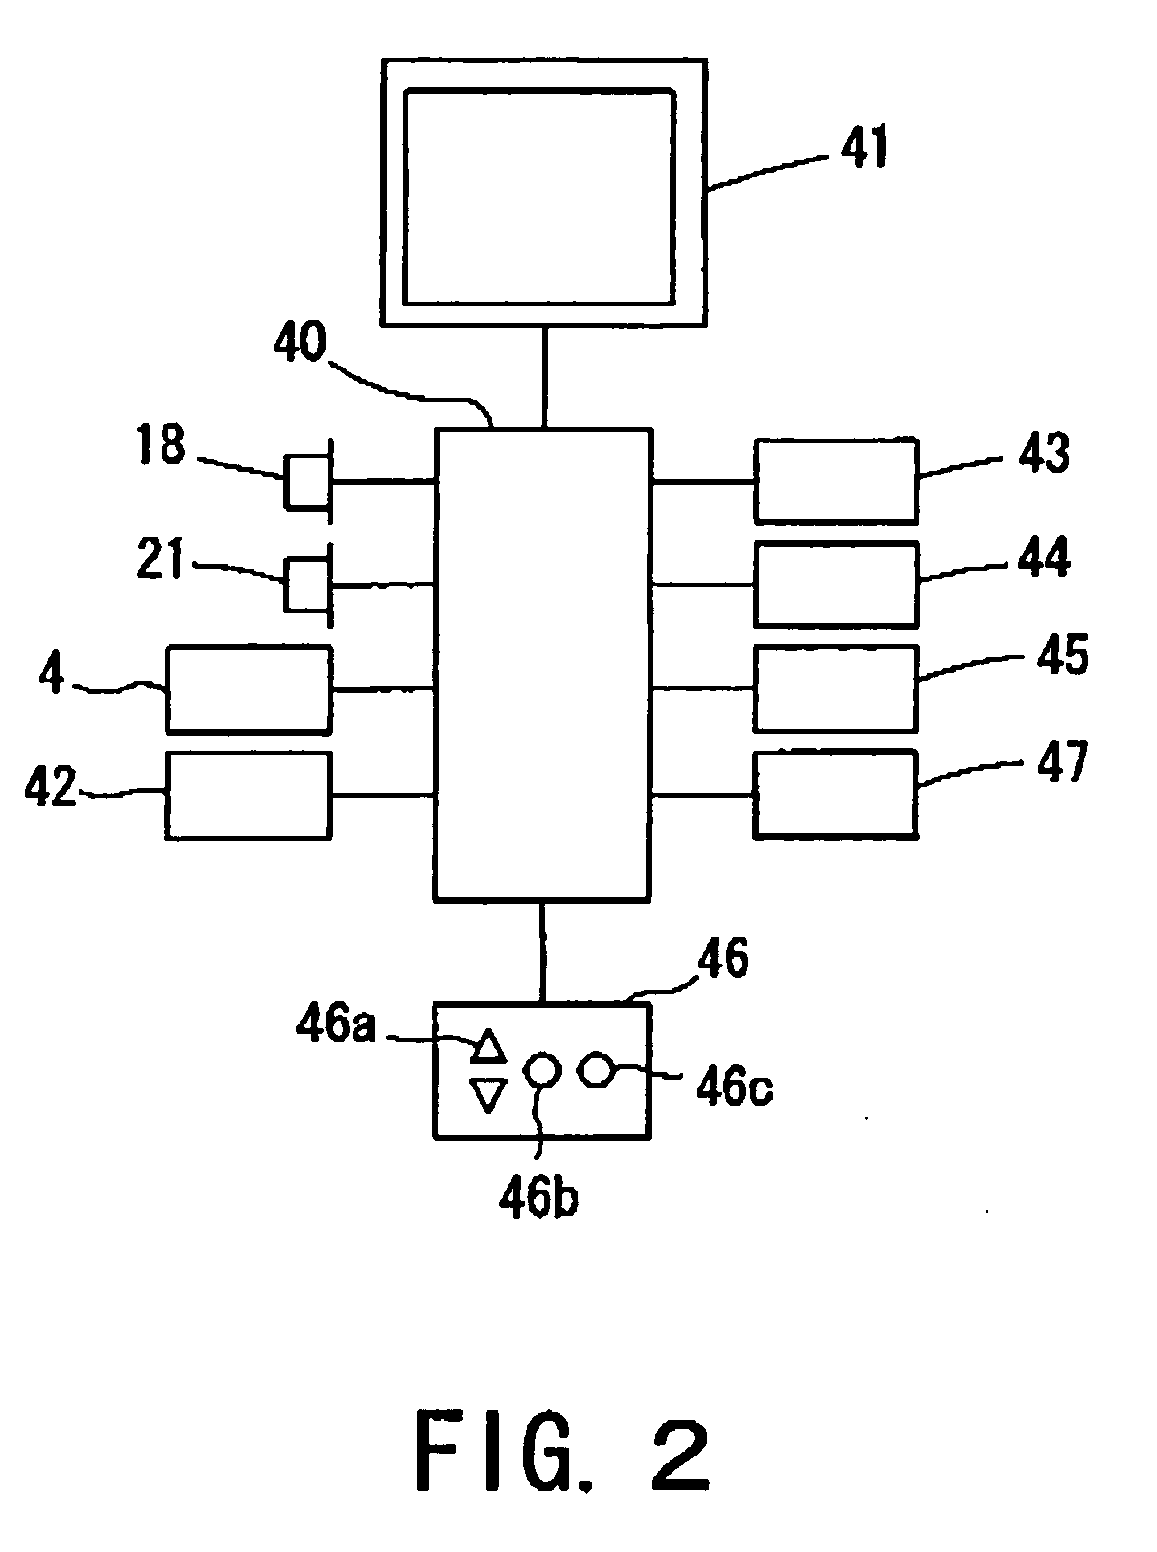 Optical coherence tomography apparatus based on spectral interference and an ophthalmic apparatus